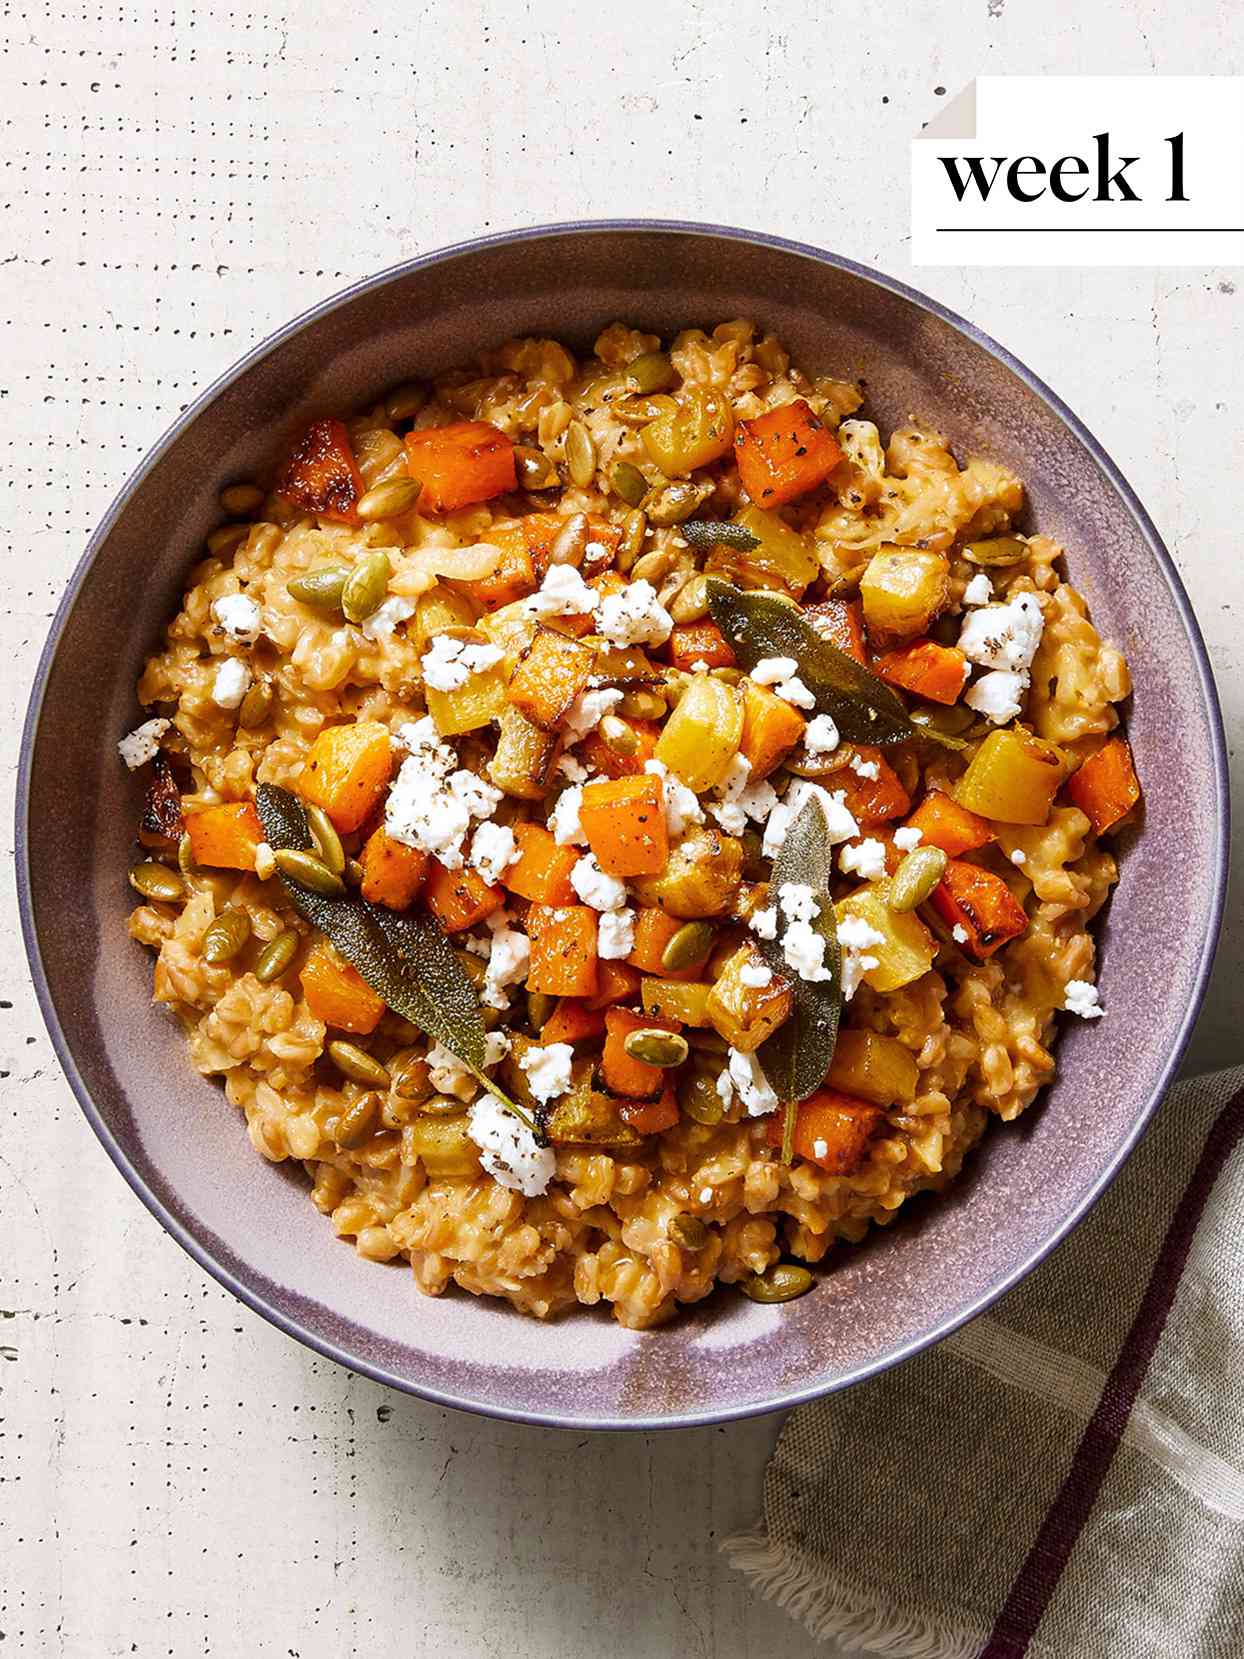 Baked Farro Risotto with Golden Vegetables and Goat Cheese